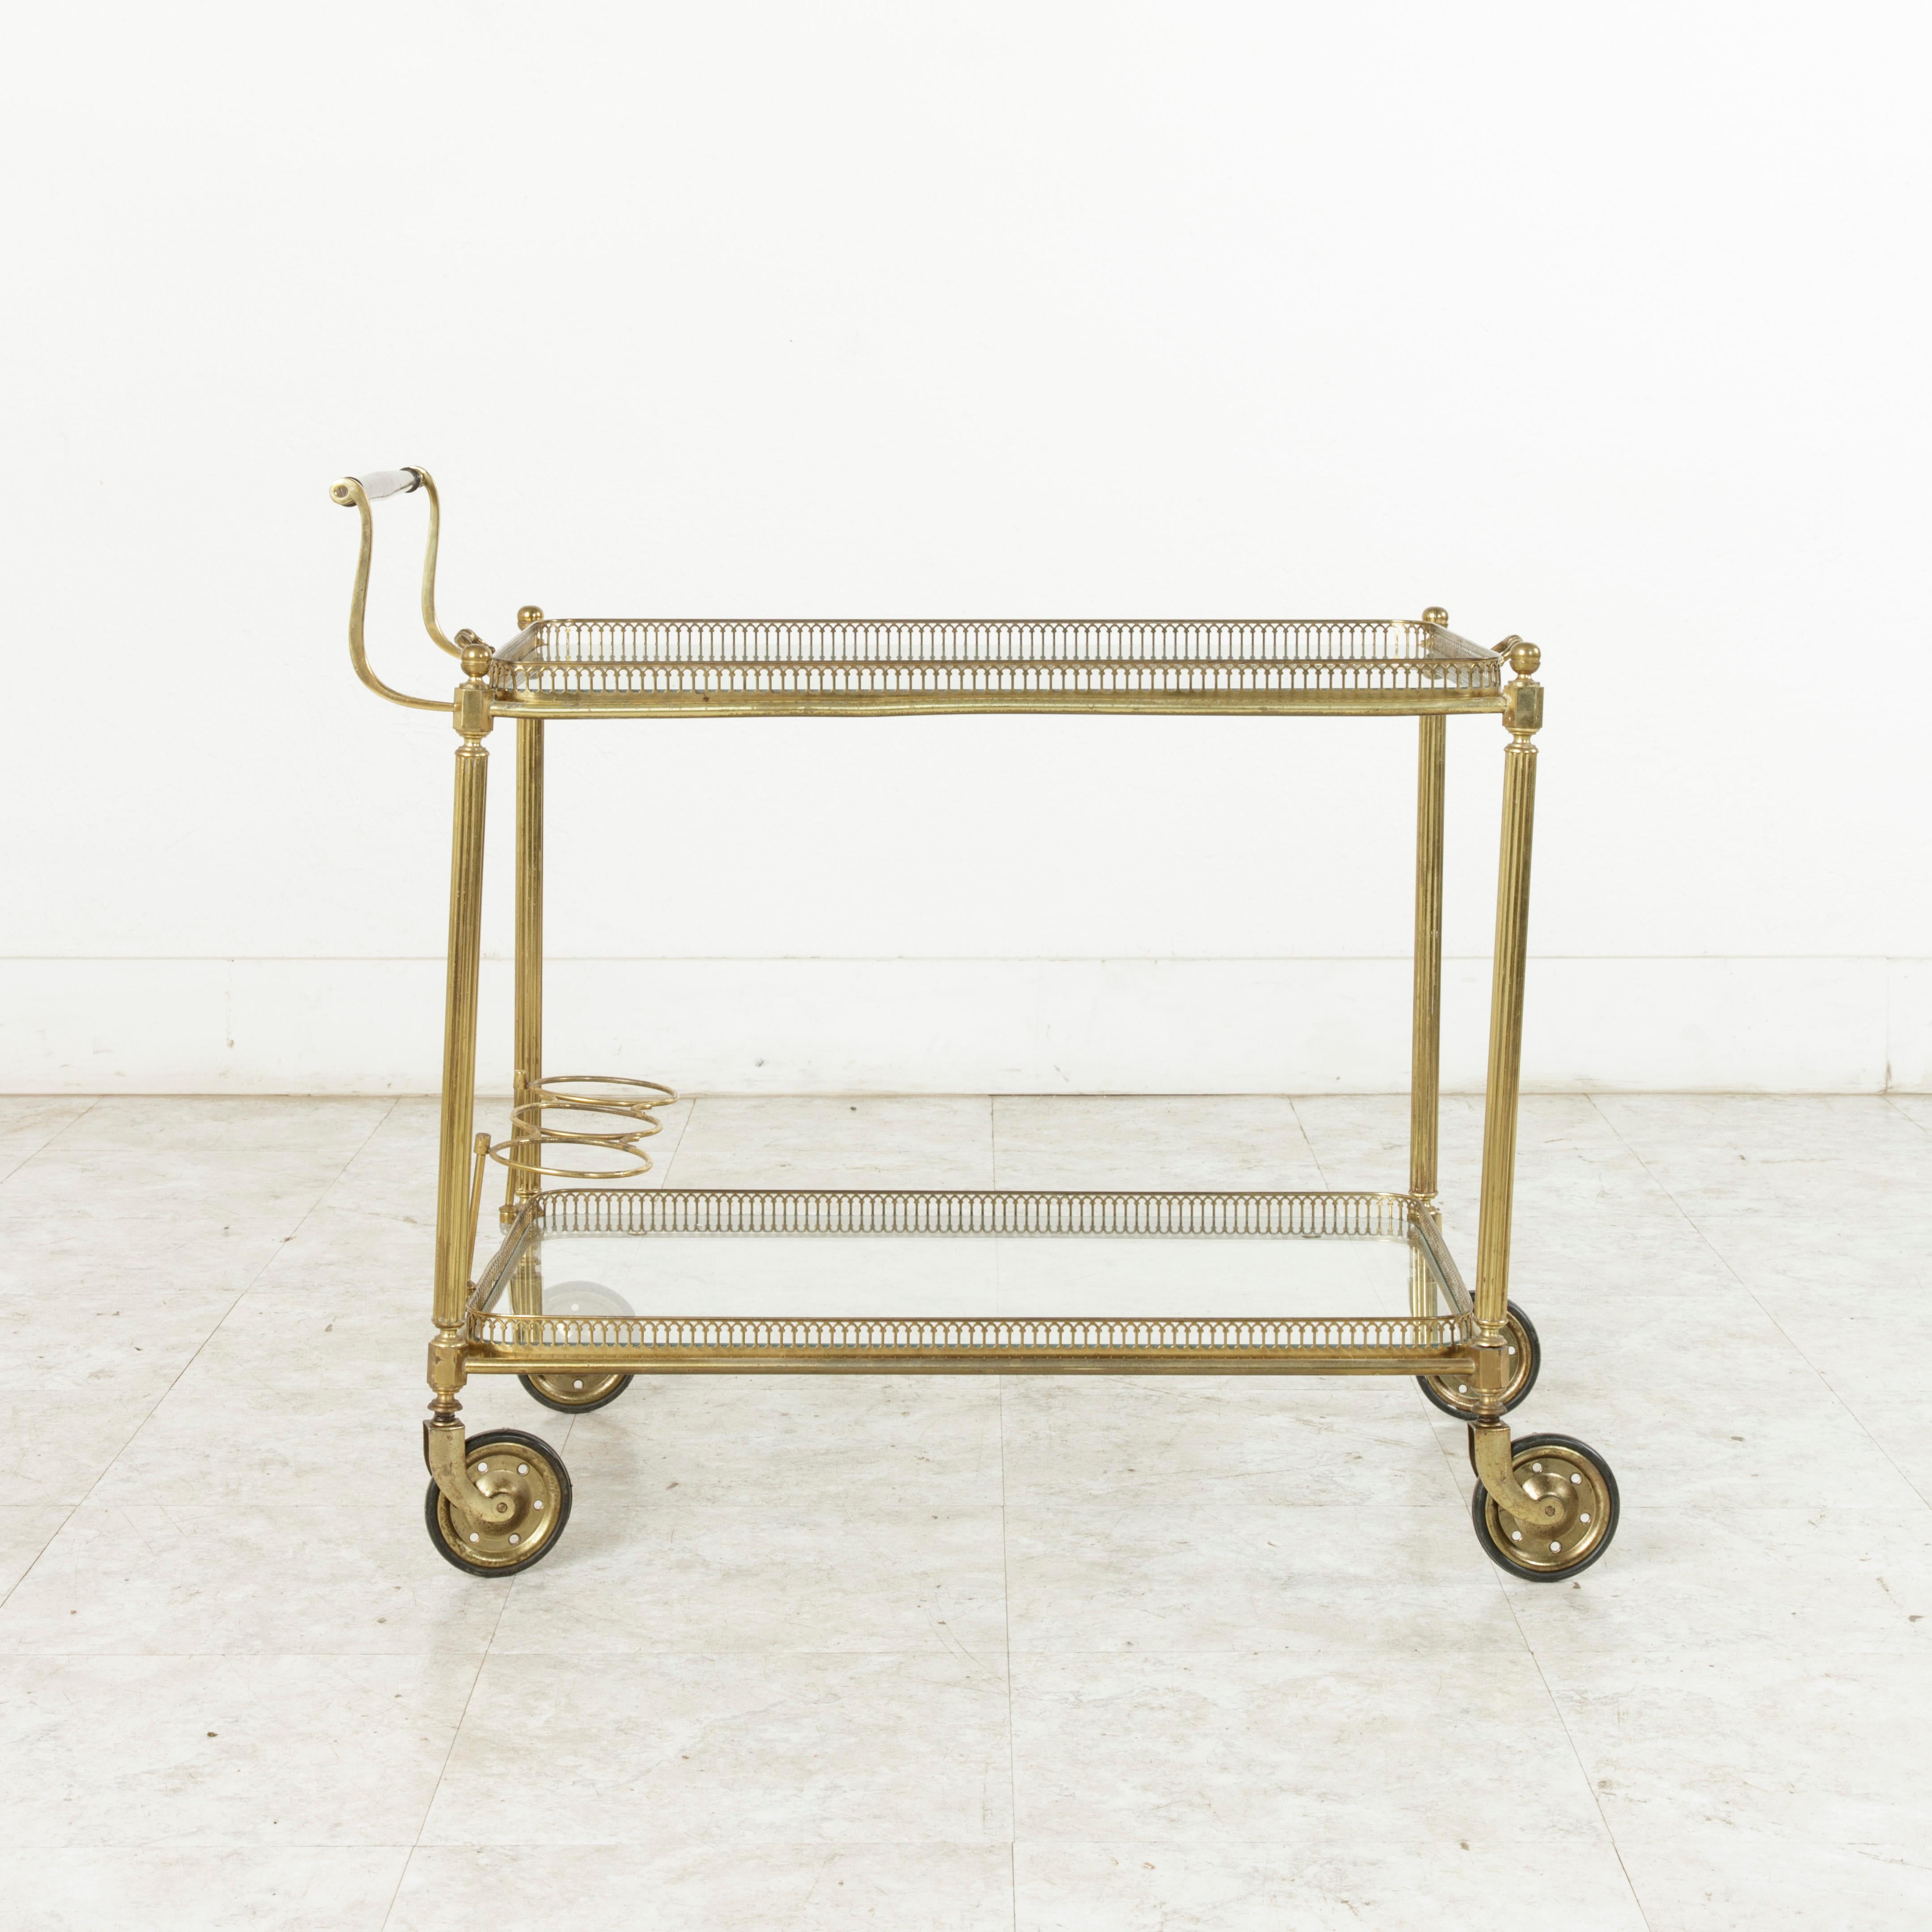 Midcentury French Brass Bar Cart with Mahogany Handle and Removable Tray (Französisch)